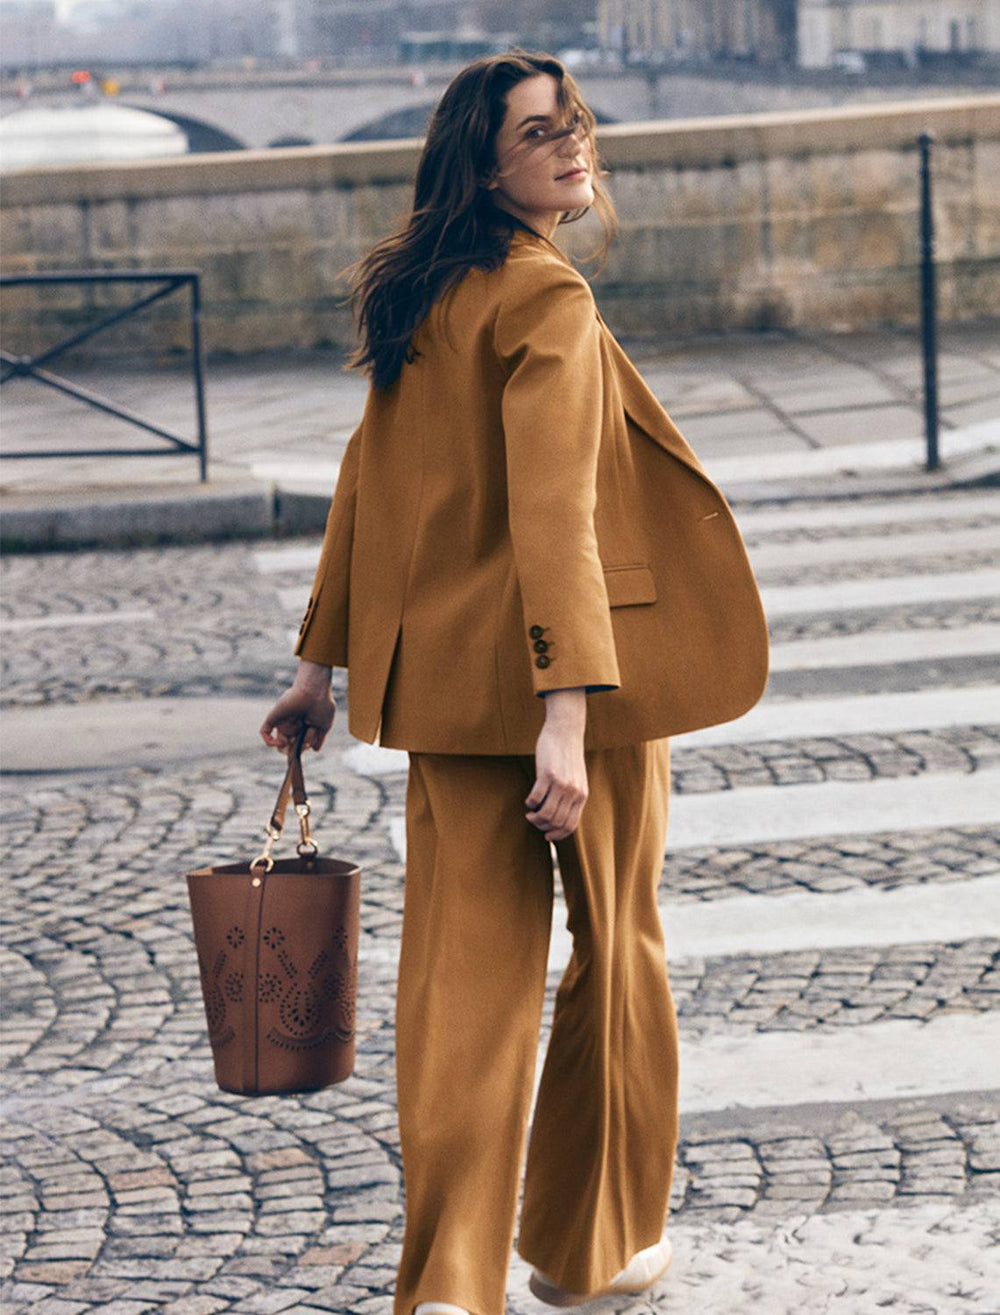 Model carrying Vanessa Bruno's holly sac seau in cognac.